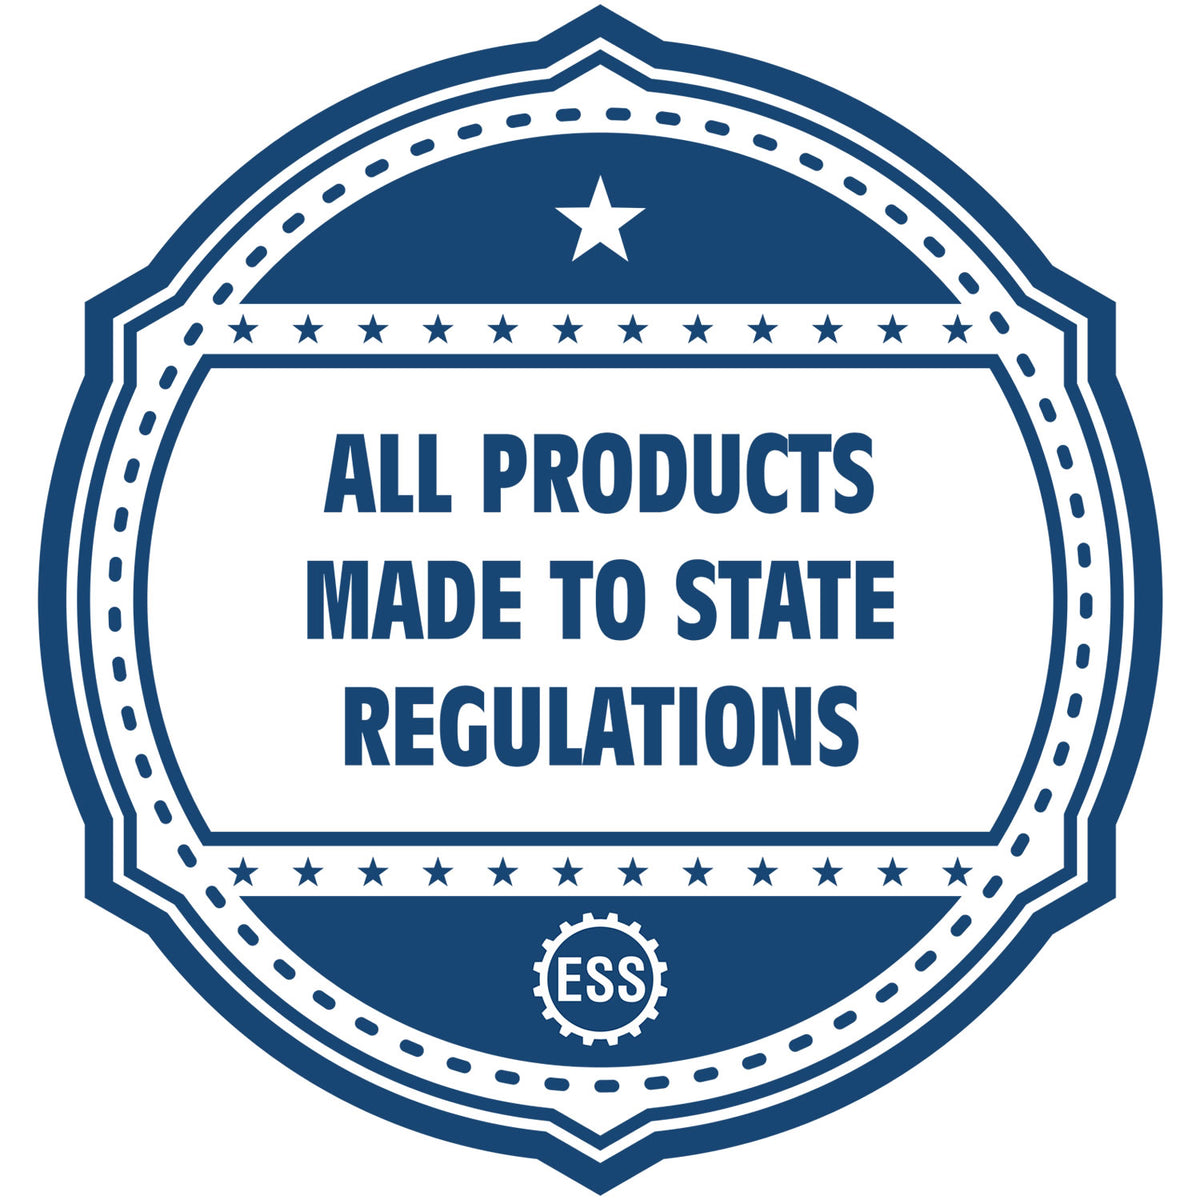 An icon or badge element for the Slim Pre-Inked Rectangular Notary Stamp for Oregon showing that this product is made in compliance with state regulations.